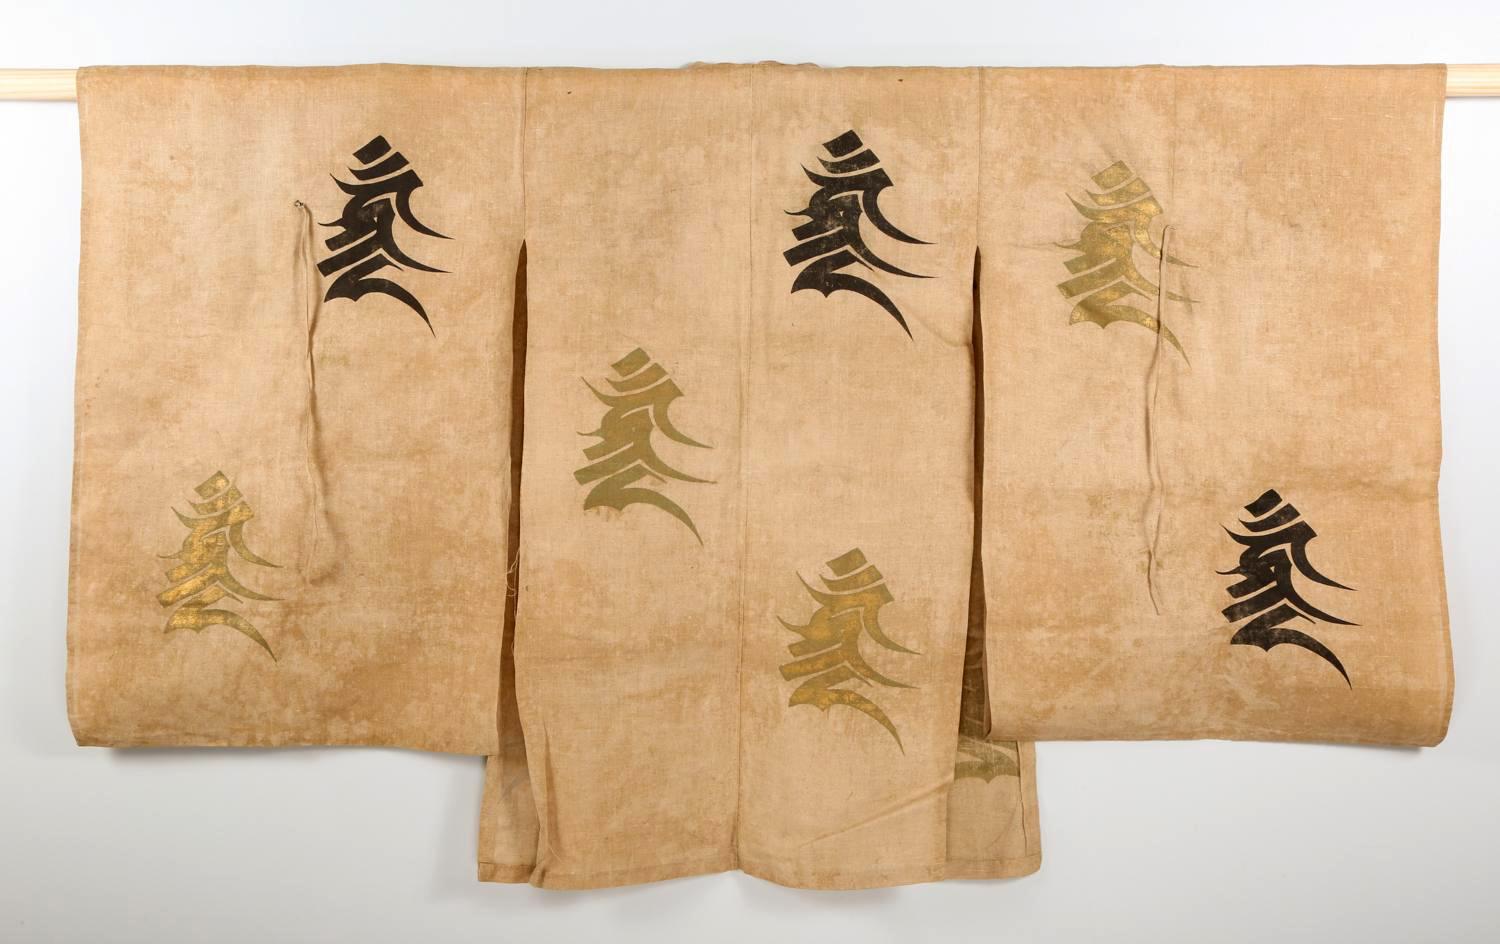 A large and striking Japanese outer cloak for Noh performance (known as Choken) circa 19th century (late Edo to early Meiji period). The robe was woven from a natural bast-fiber (known as Asa) likely fine hemp dyed in a light yellow. It was